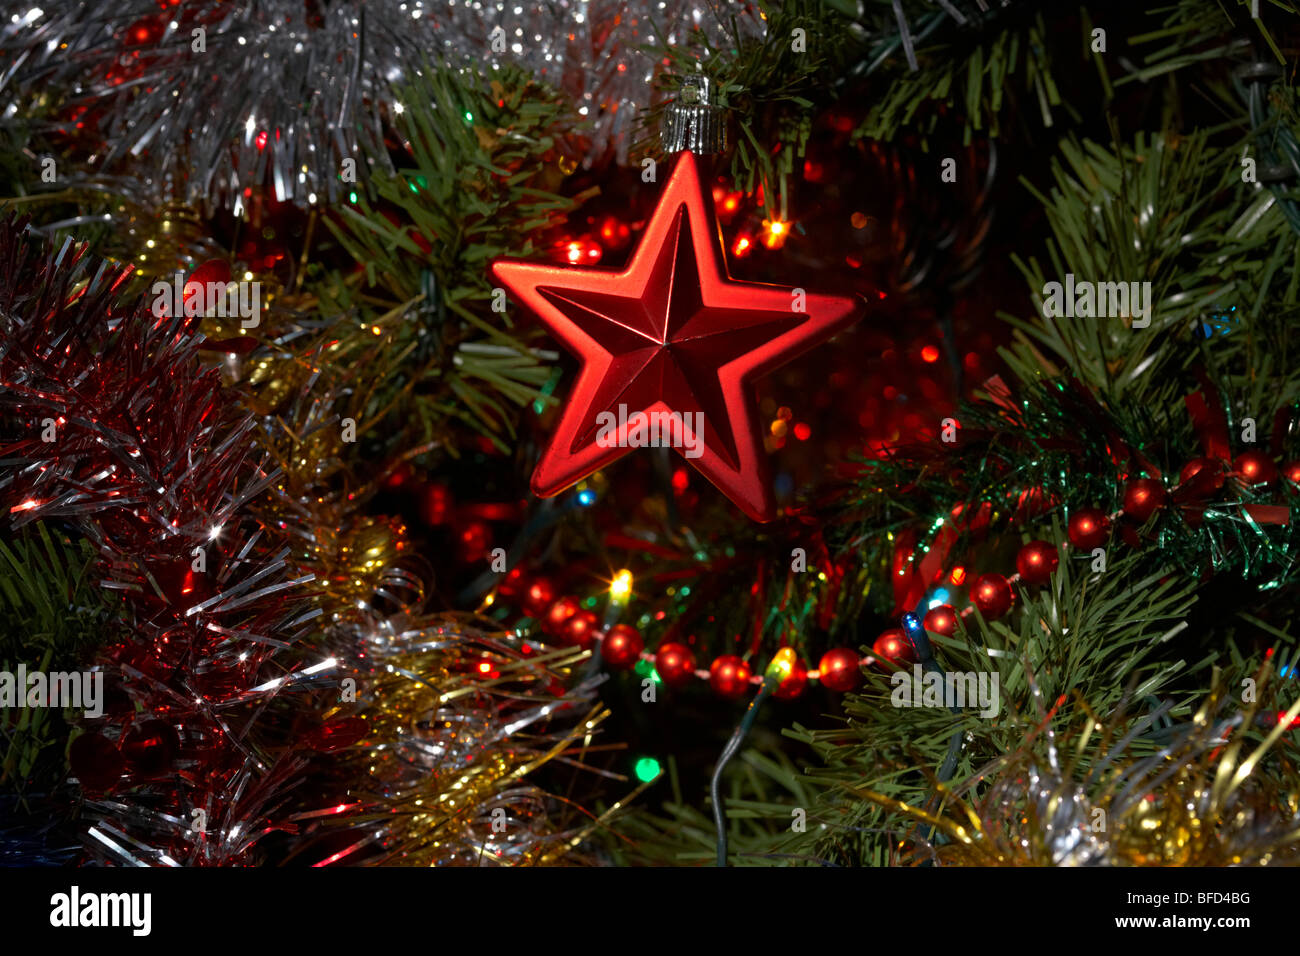 red star decoration hanging on an artificial christmas tree Stock Photo